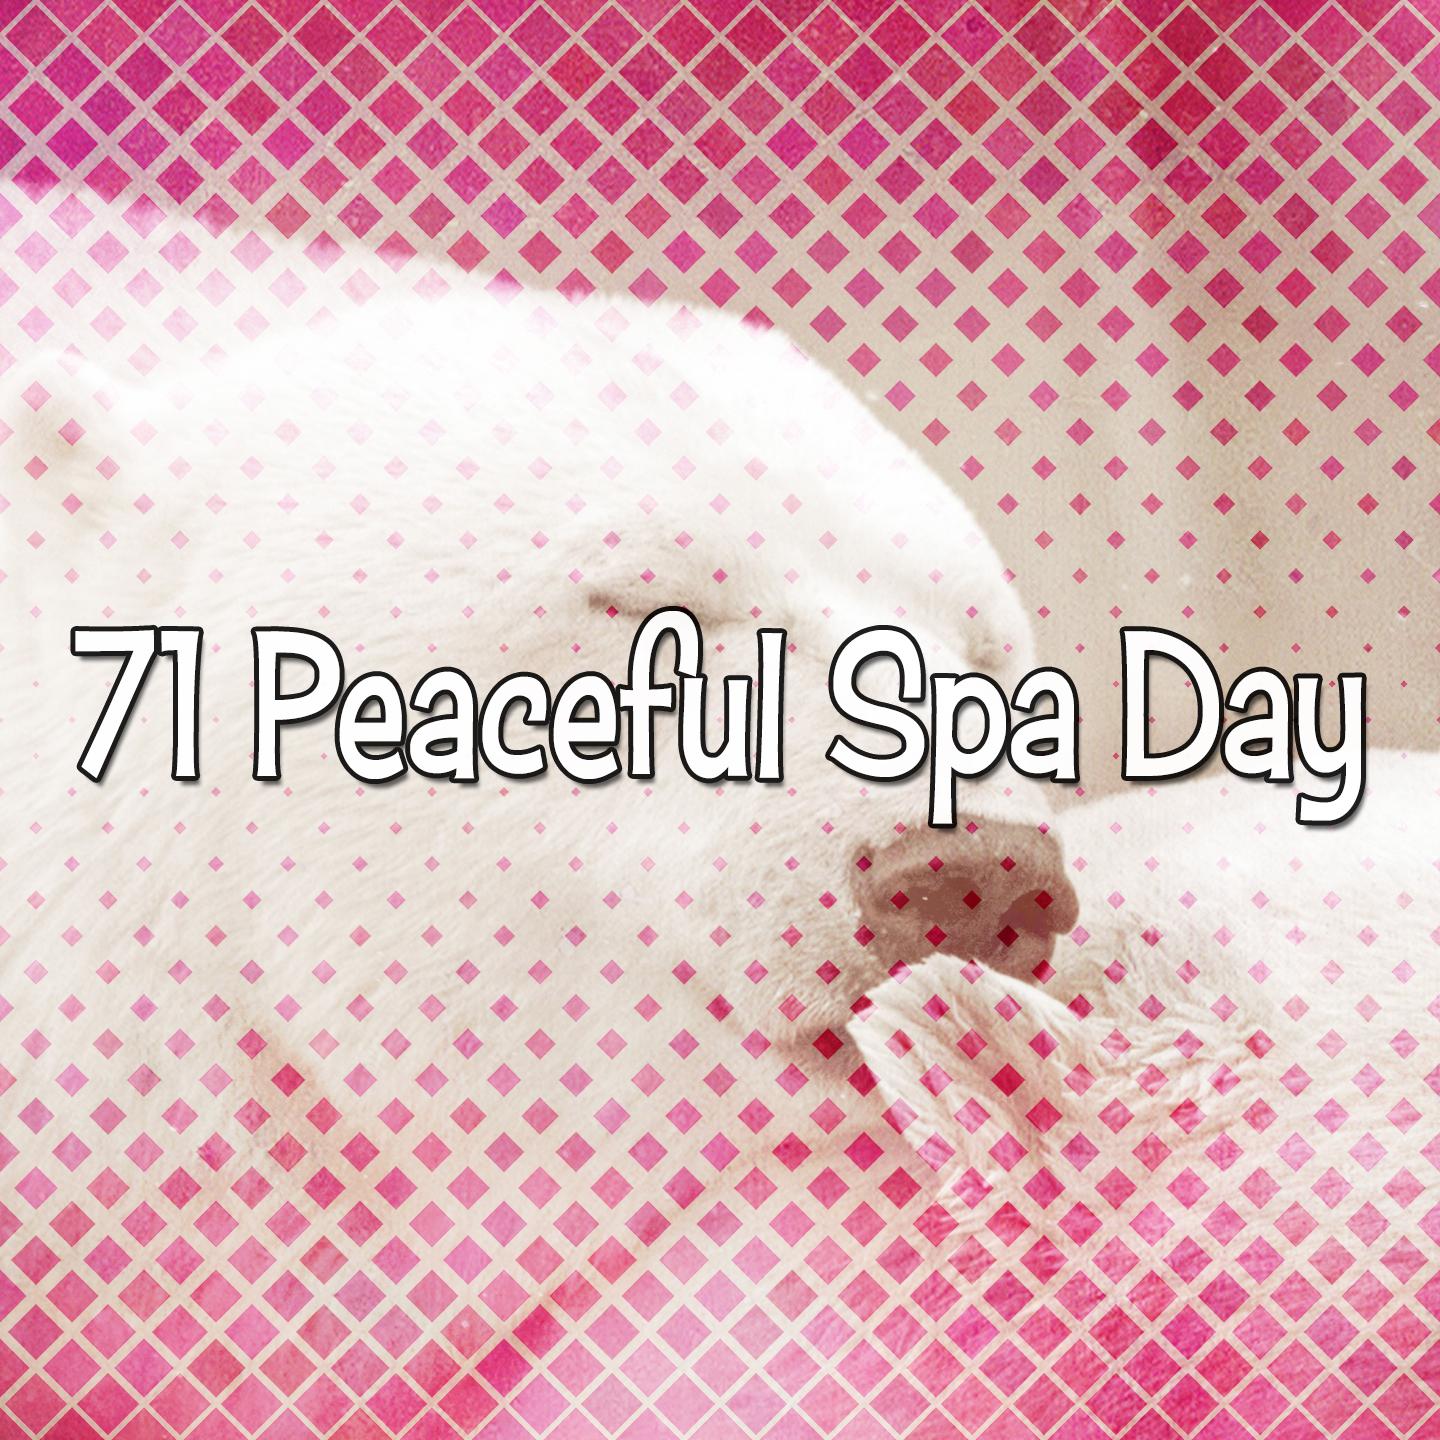 71 Peaceful Spa Day